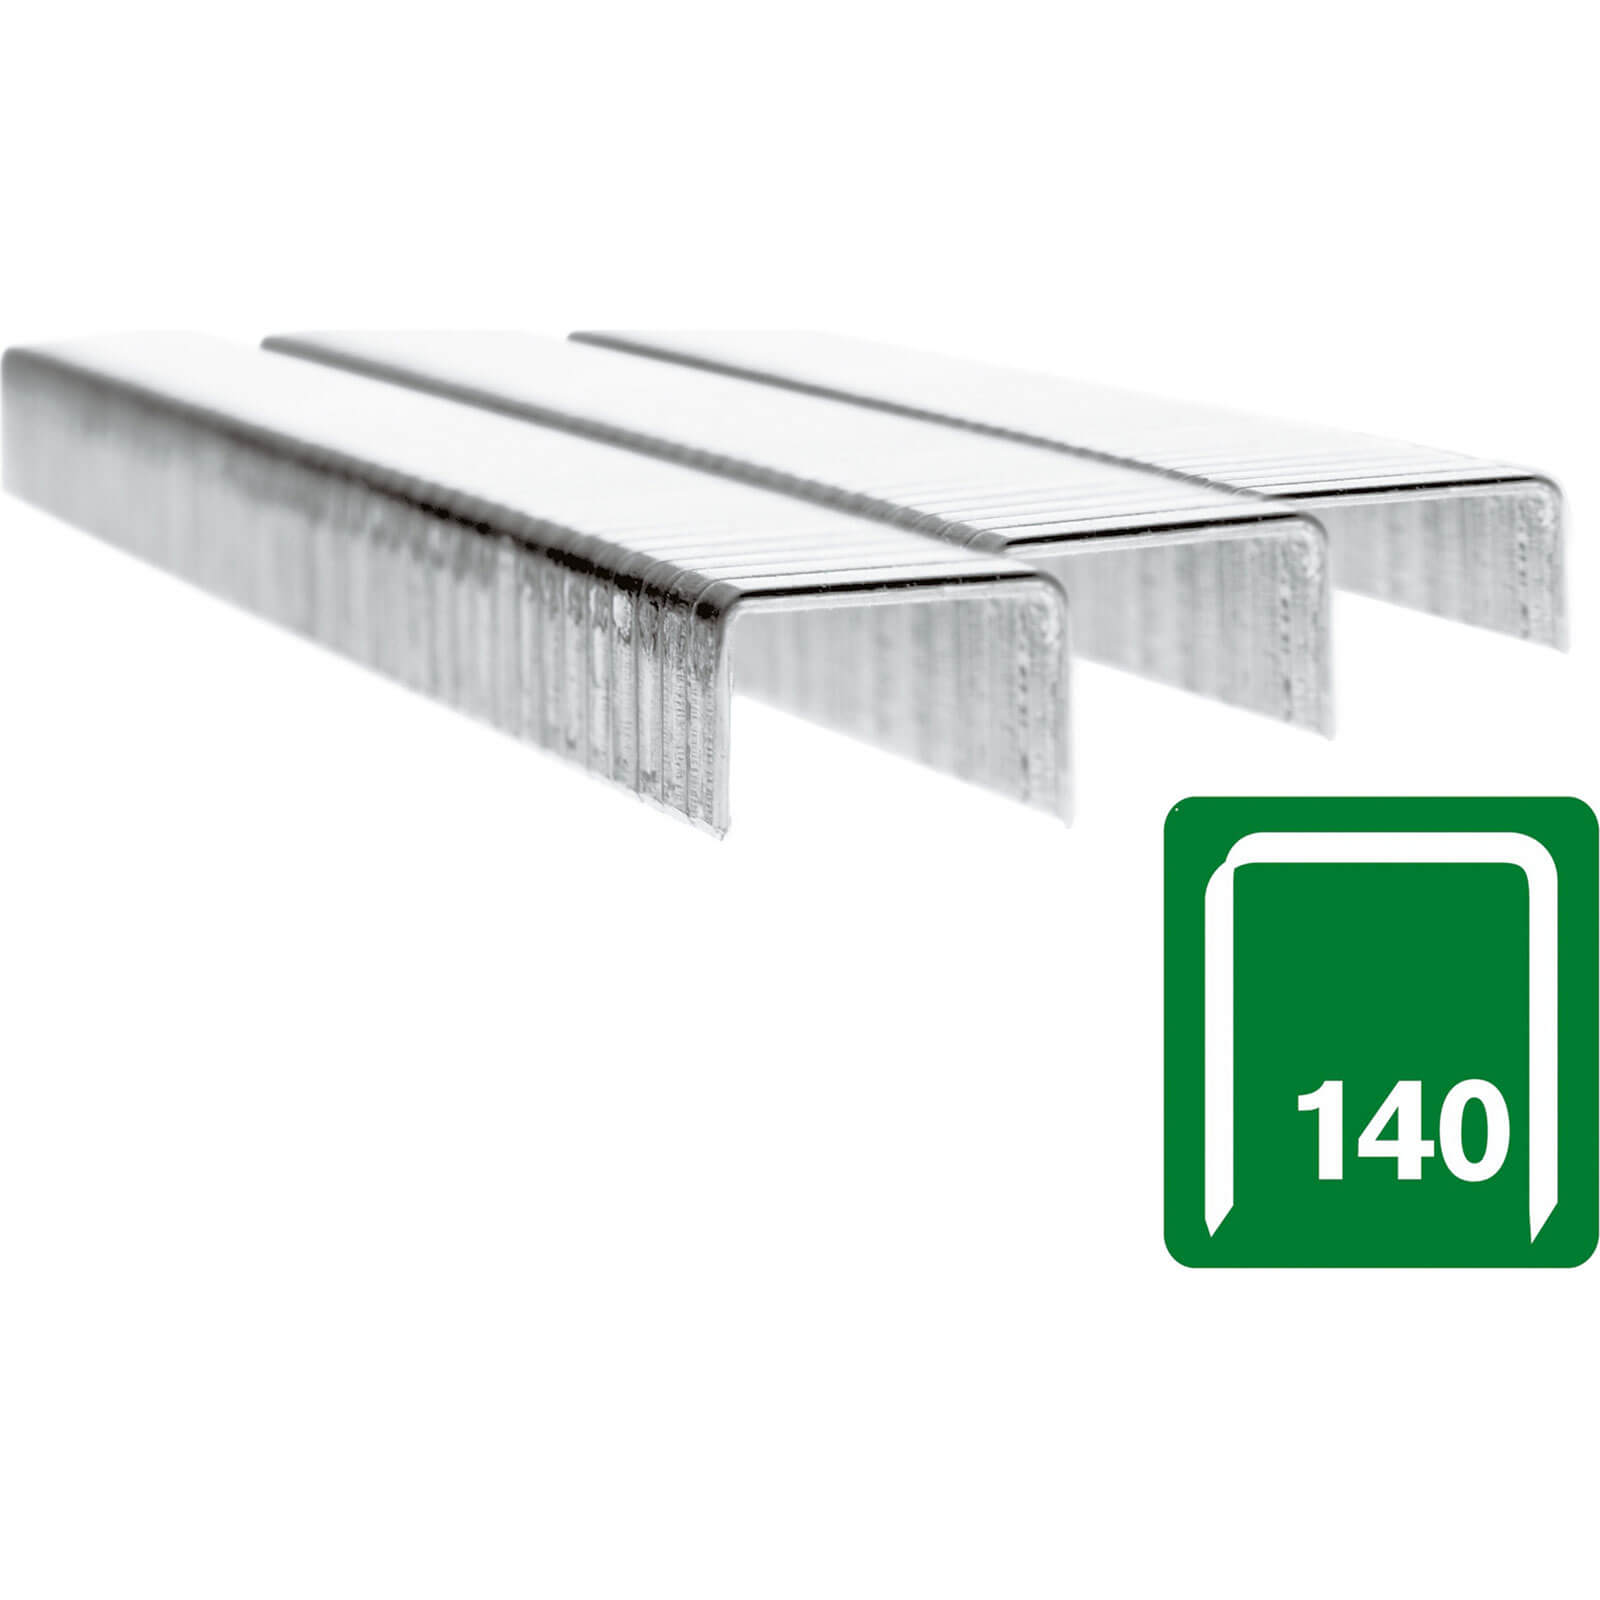 Rapid 140 / 10NB 10mm Stainless Steel Staples Pack of 650